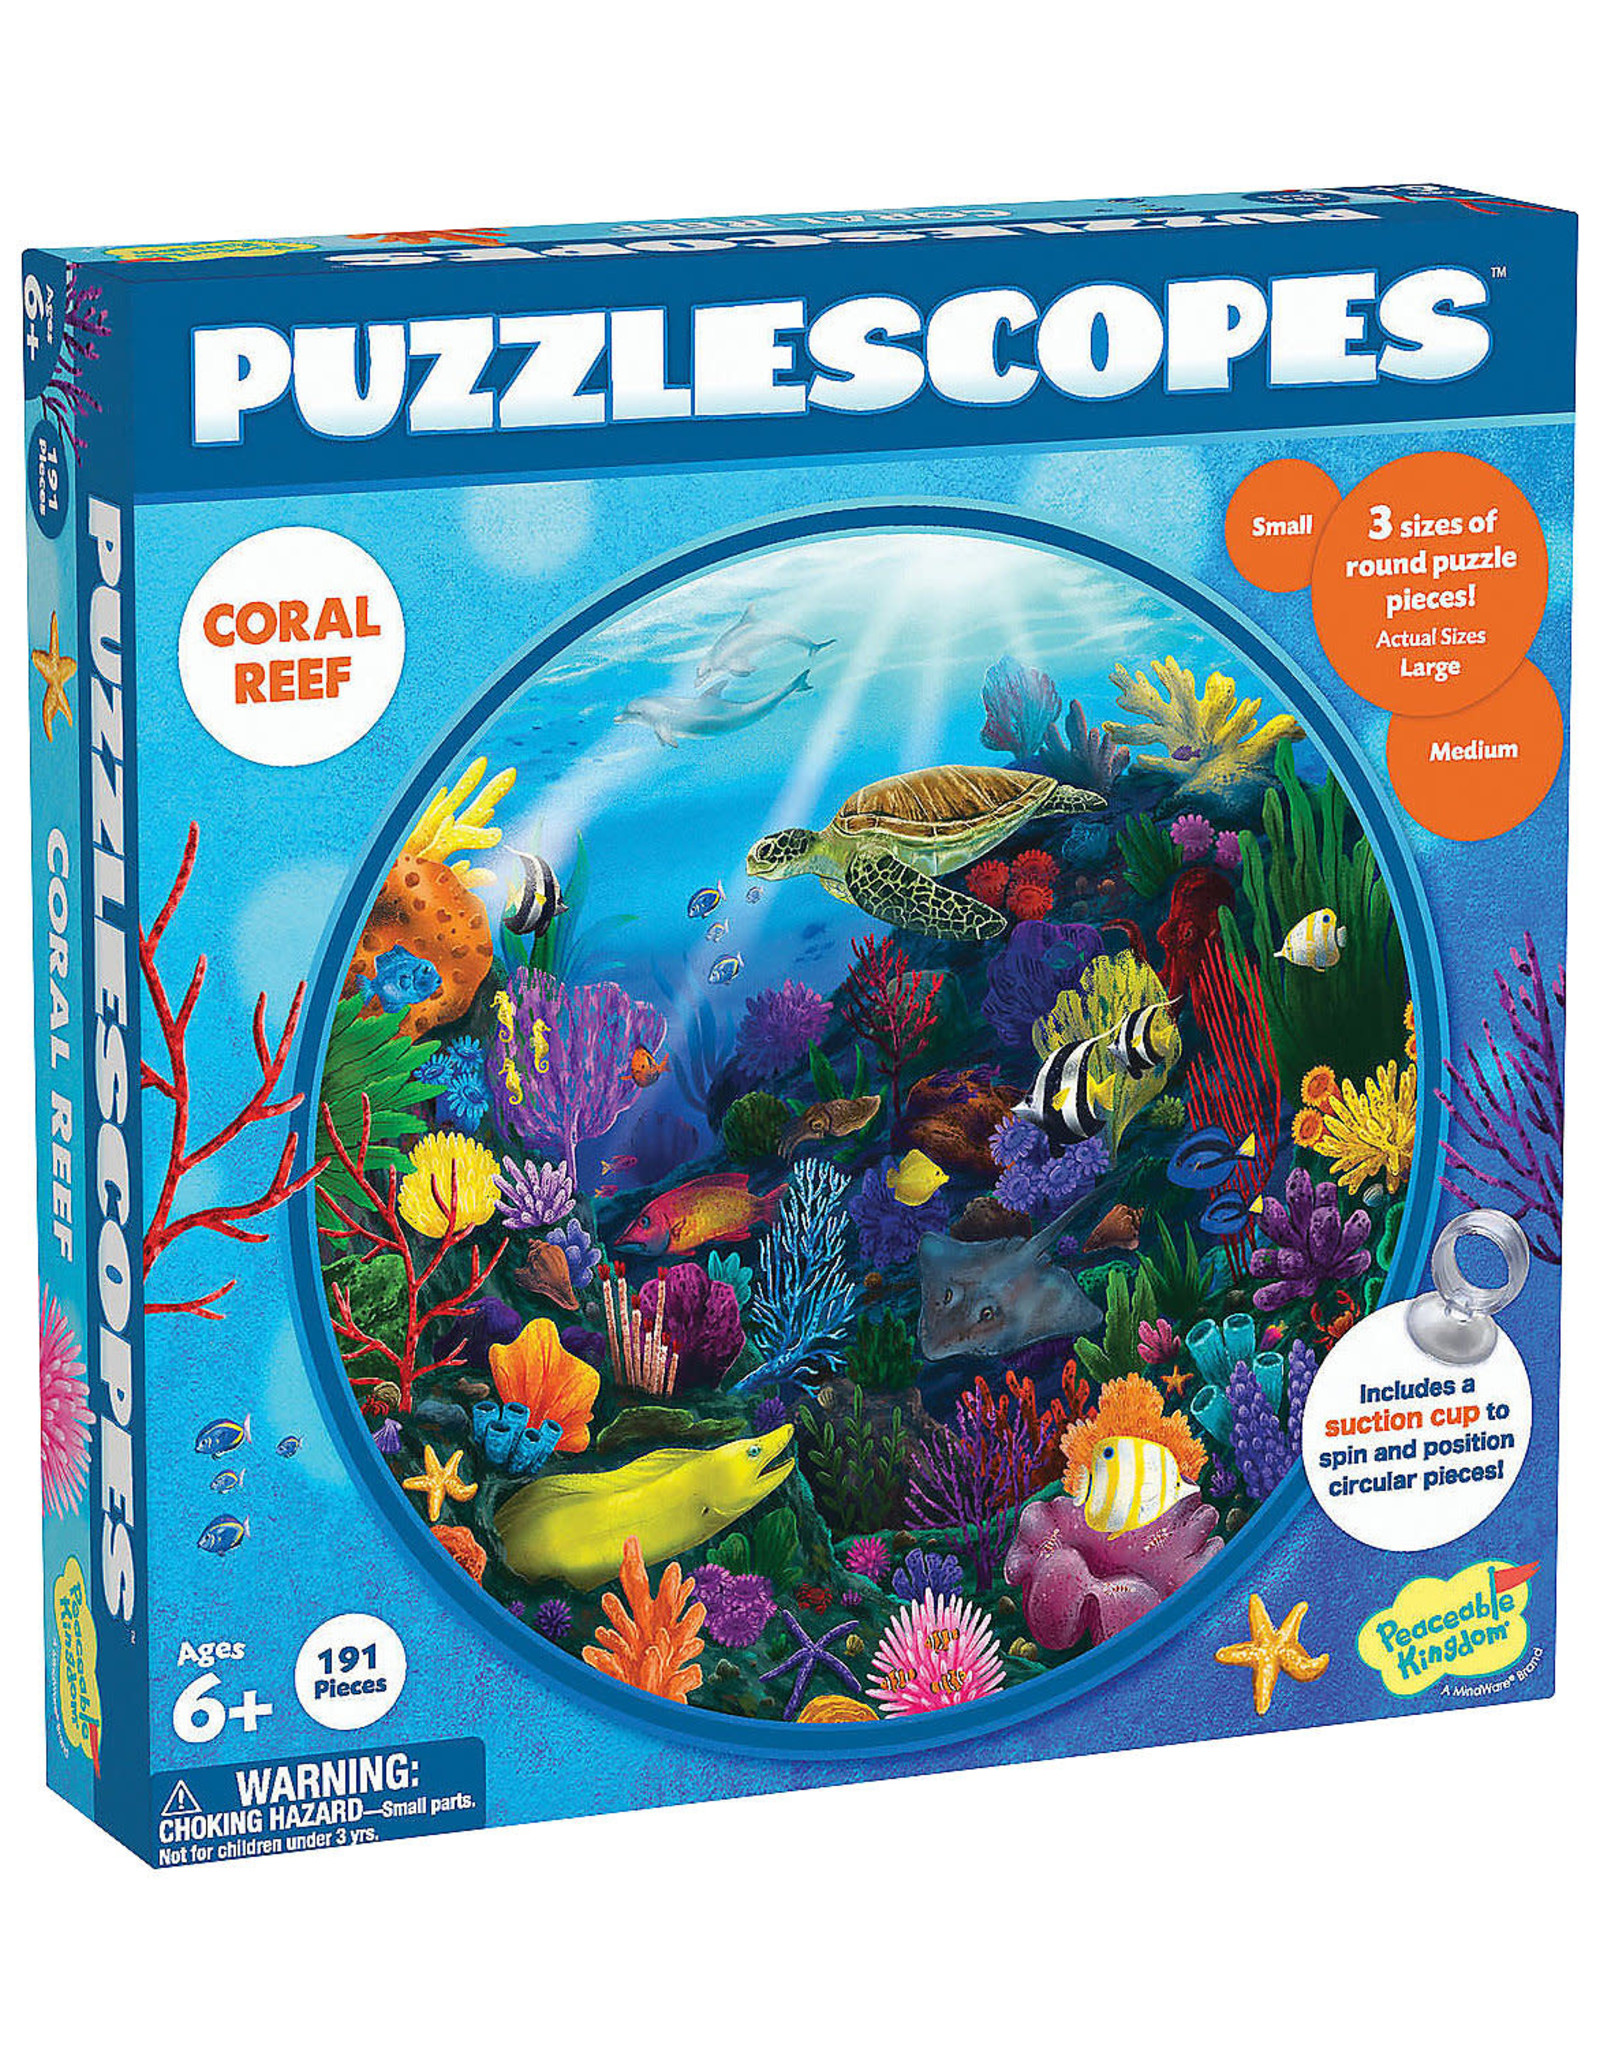 MINDWARE PUZZLESCOPES: CORAL REEF